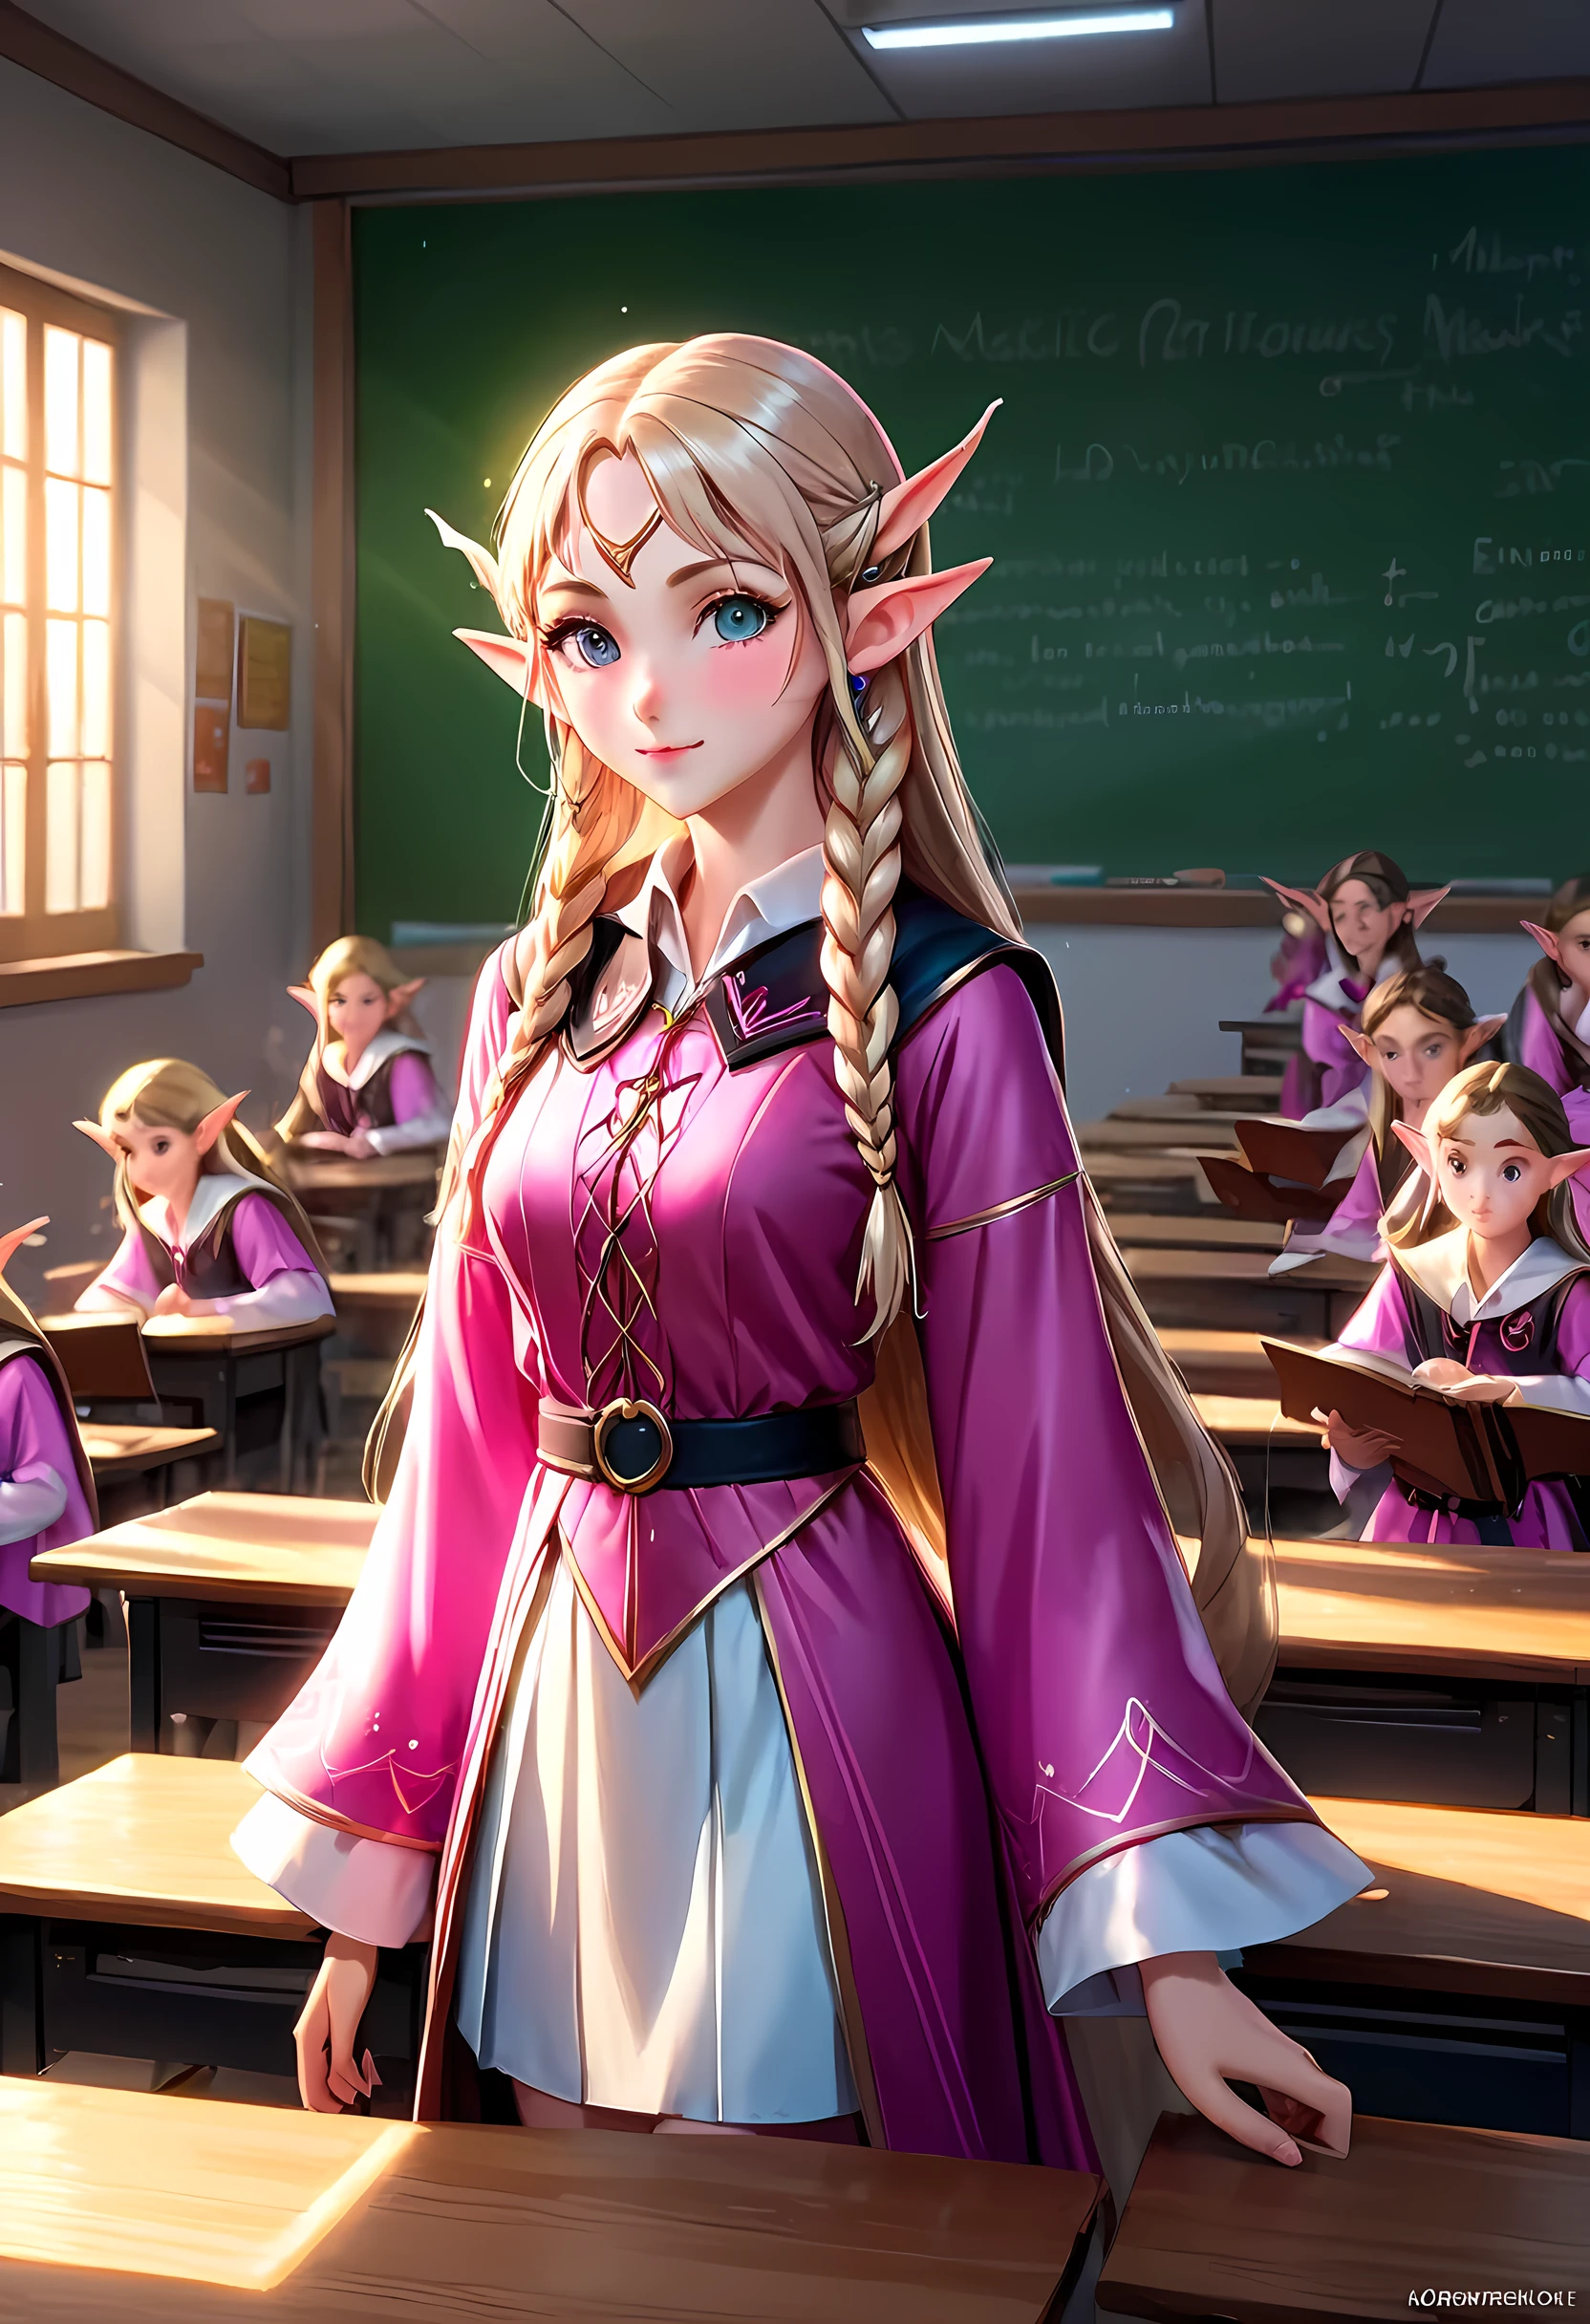 high details, best quality, 16k, [ultra detailed], masterpiece, best quality, (extremely detailed), ultra wide shot, photorealistic, a picture of an elf magical teacher (best details, Masterpiece, best quality: 1.5), teaching magical arts, manipulating magical pink magic runes in the air GlowingRunes_pink (best details, Masterpiece, best quality: 1.5) at fantasy classroom, a female elf, exquisite beauty (best details, Masterpiece, best quality: 1.5), ultra feminine (best details, Masterpiece, best quality: 1.5), full body (best details, Masterpiece, best quality: 1.5) golden hair, hair in a long braid, small pointed ears, dynamic eyes color, wearing a teachers robe, standing in the classroom (best details, Masterpiece, best quality: 1.5), fantasy class background, best realistic, best details, best quality, 16k, [ultra detailed], masterpiece, best quality, (extremely detailed), ultra wide shot, photorealism, room is lit with bright light, depth of field, half-elf ears, ArmoredDress